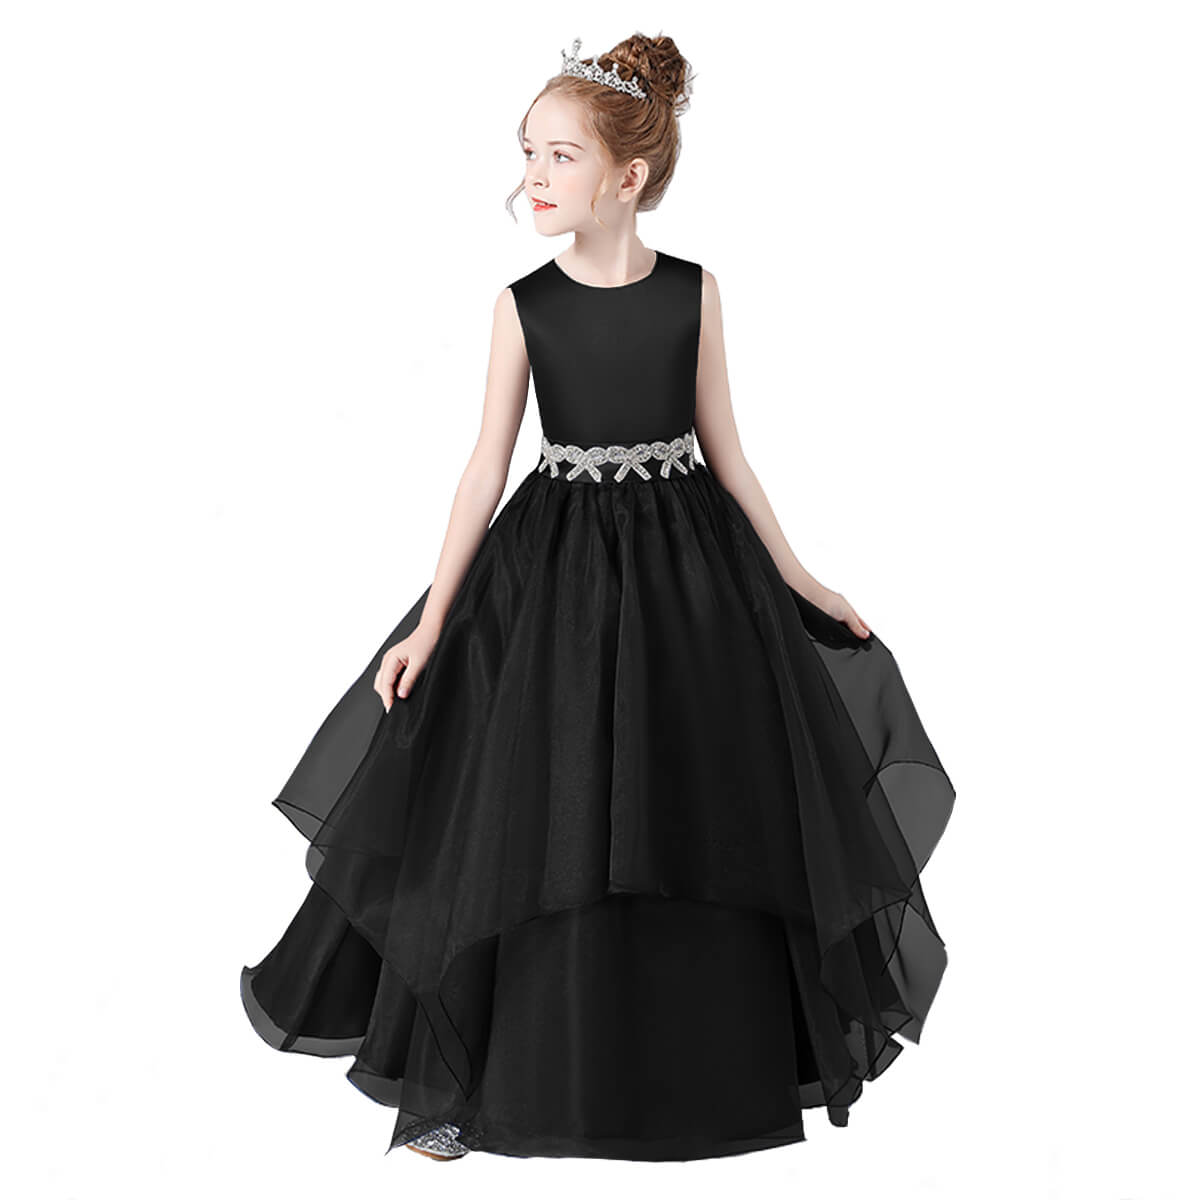 Top 15 Beautiful Flower Girl Dresses for Kid Girl | Styles At Life